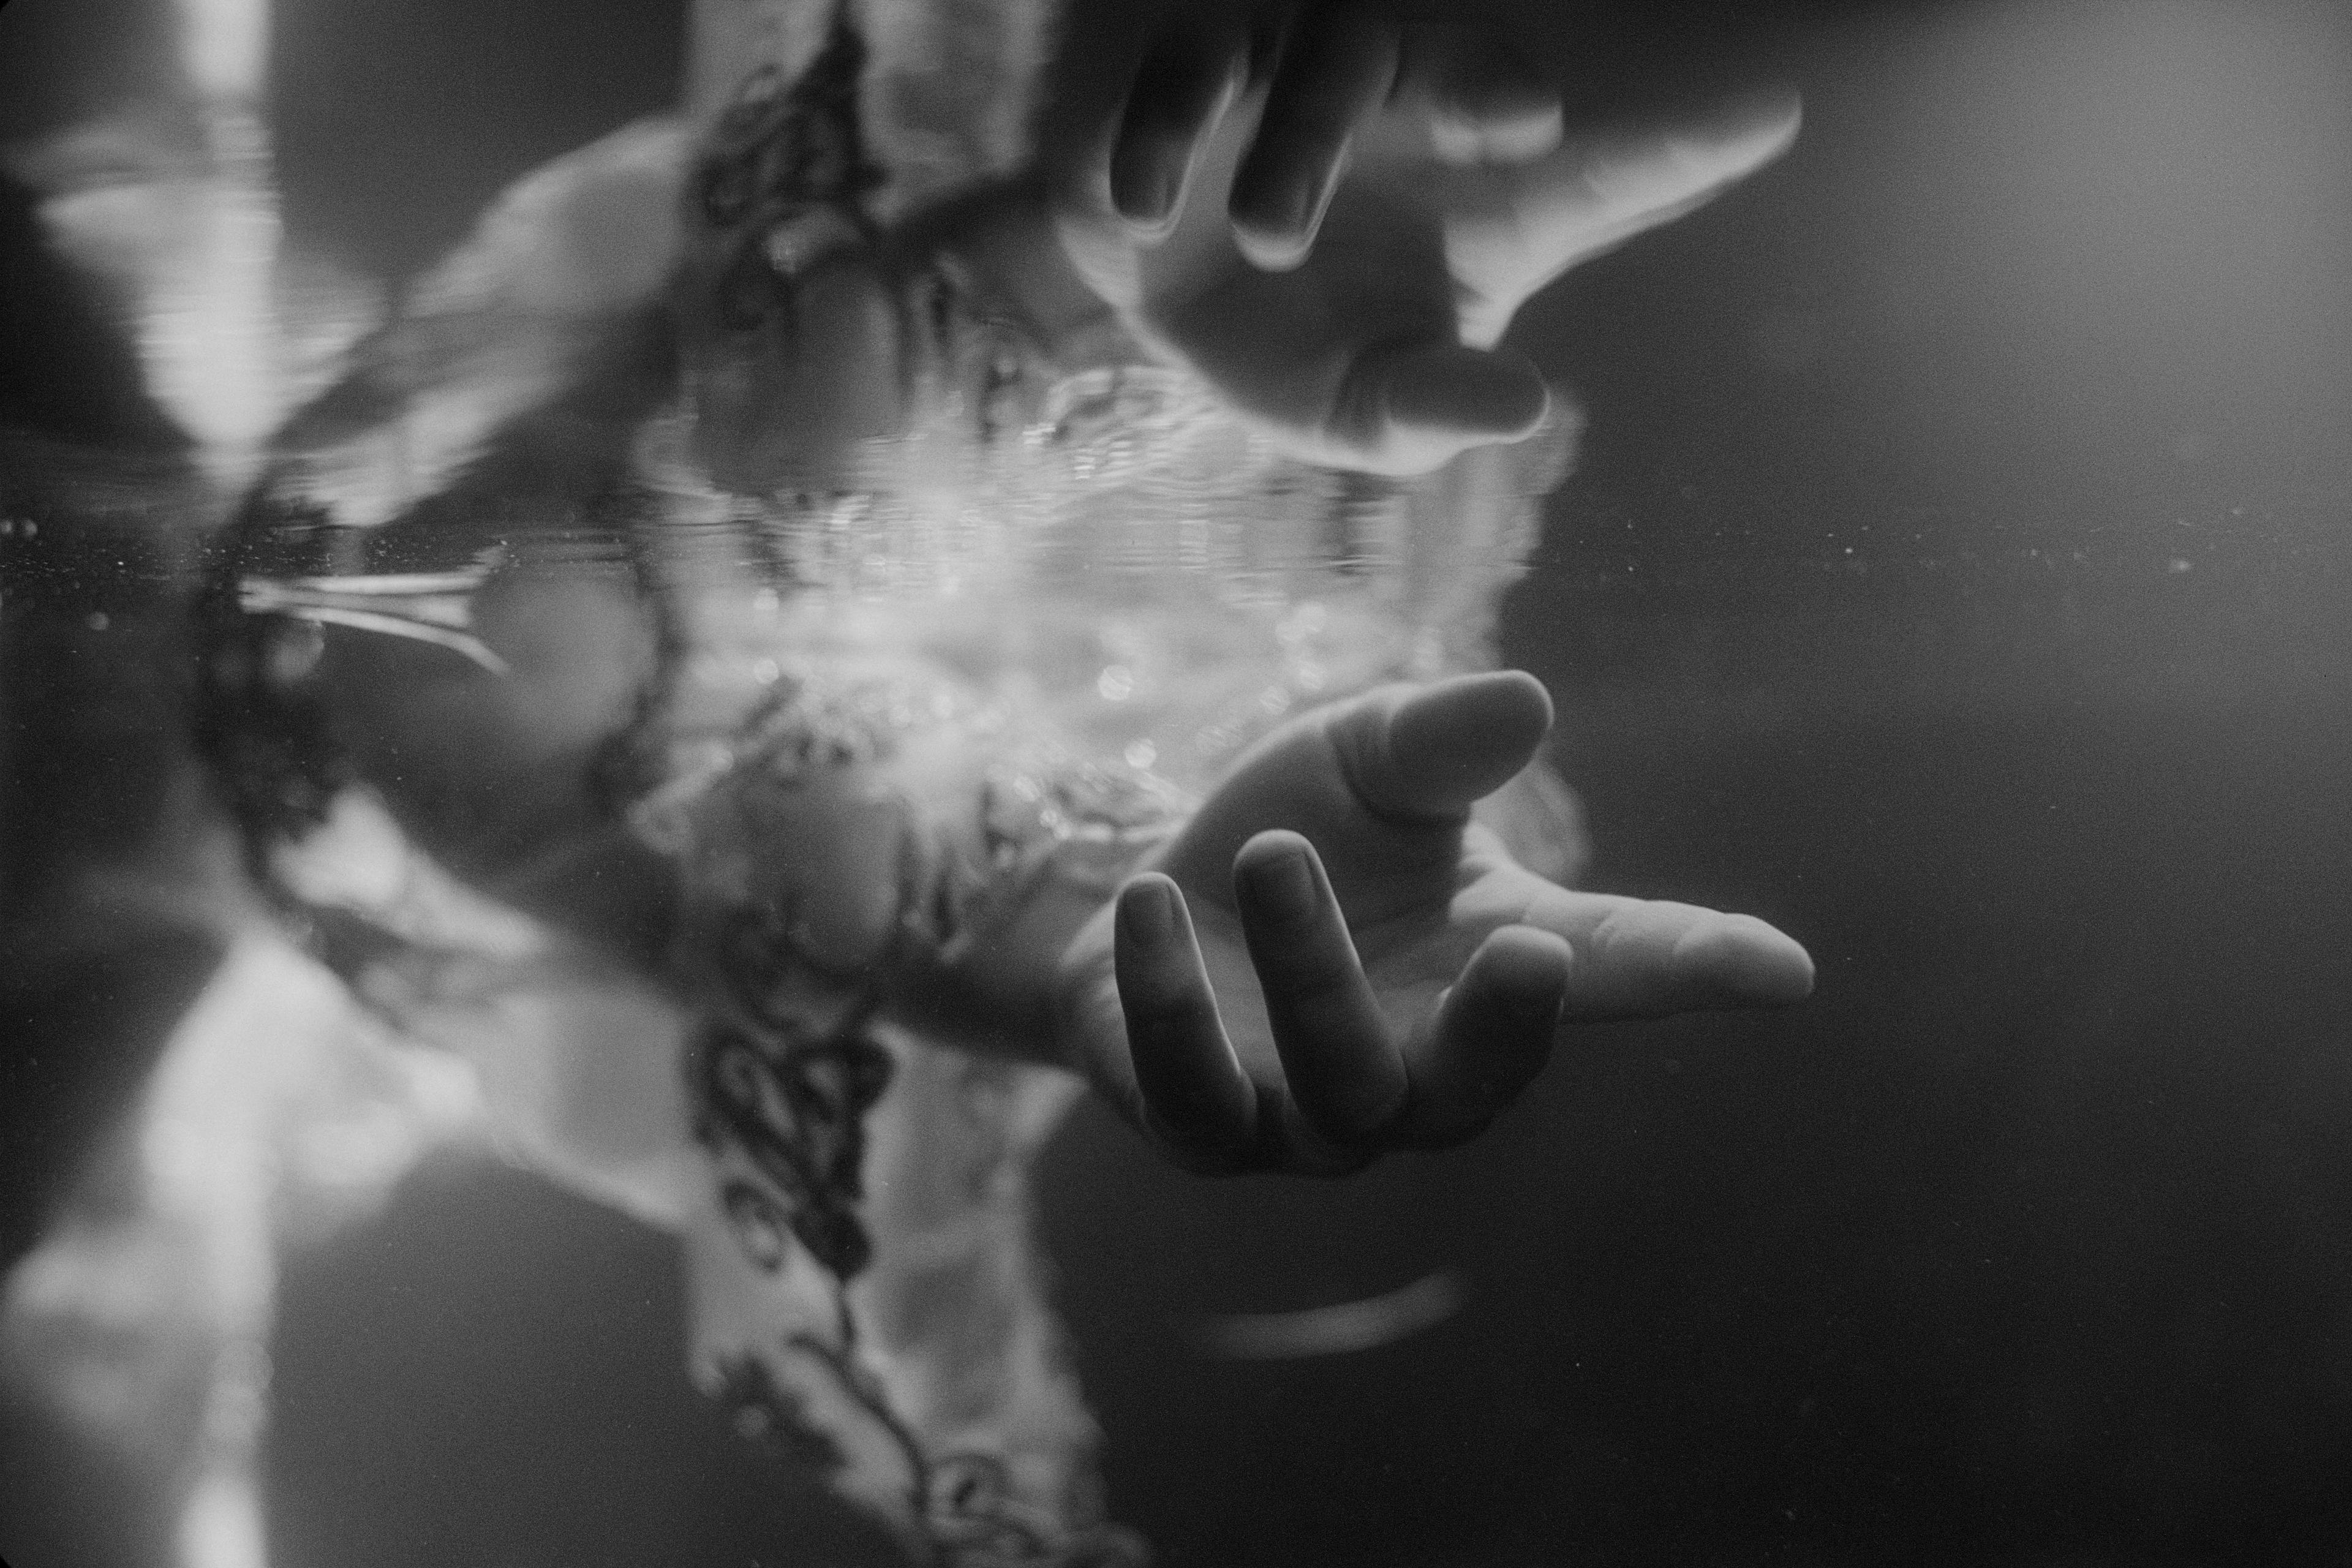 reflection of Mitski's hand over the surface of the water